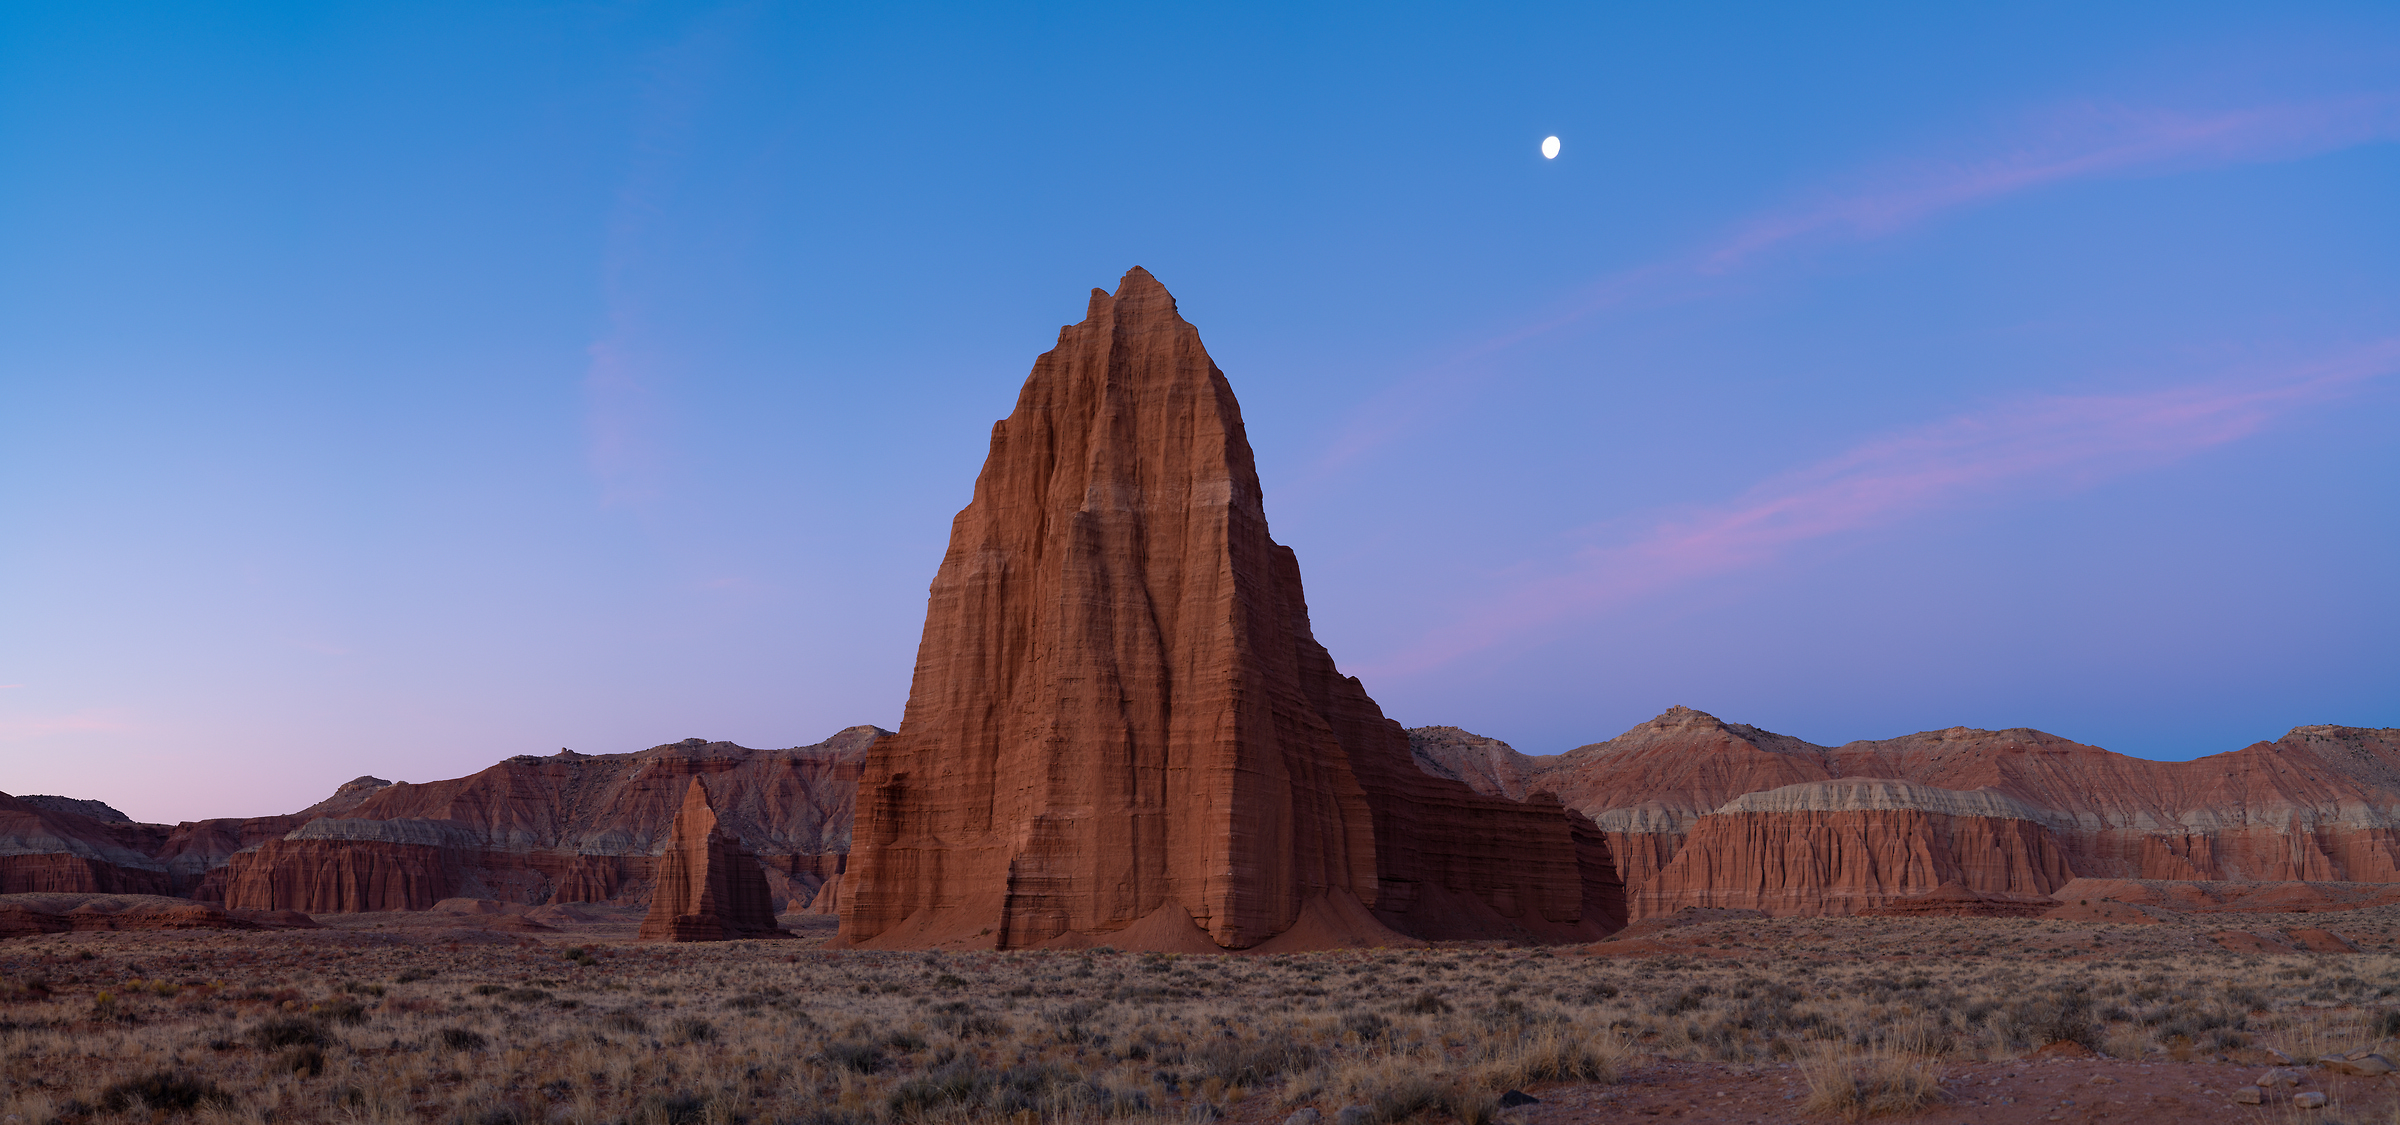 275 megapixels! A very high resolution, large-format VAST photo print of a meditative landscape photo with the temples of Capitol Reef National Park, sunset, and the moon; photograph created by Greg Probst in Utah